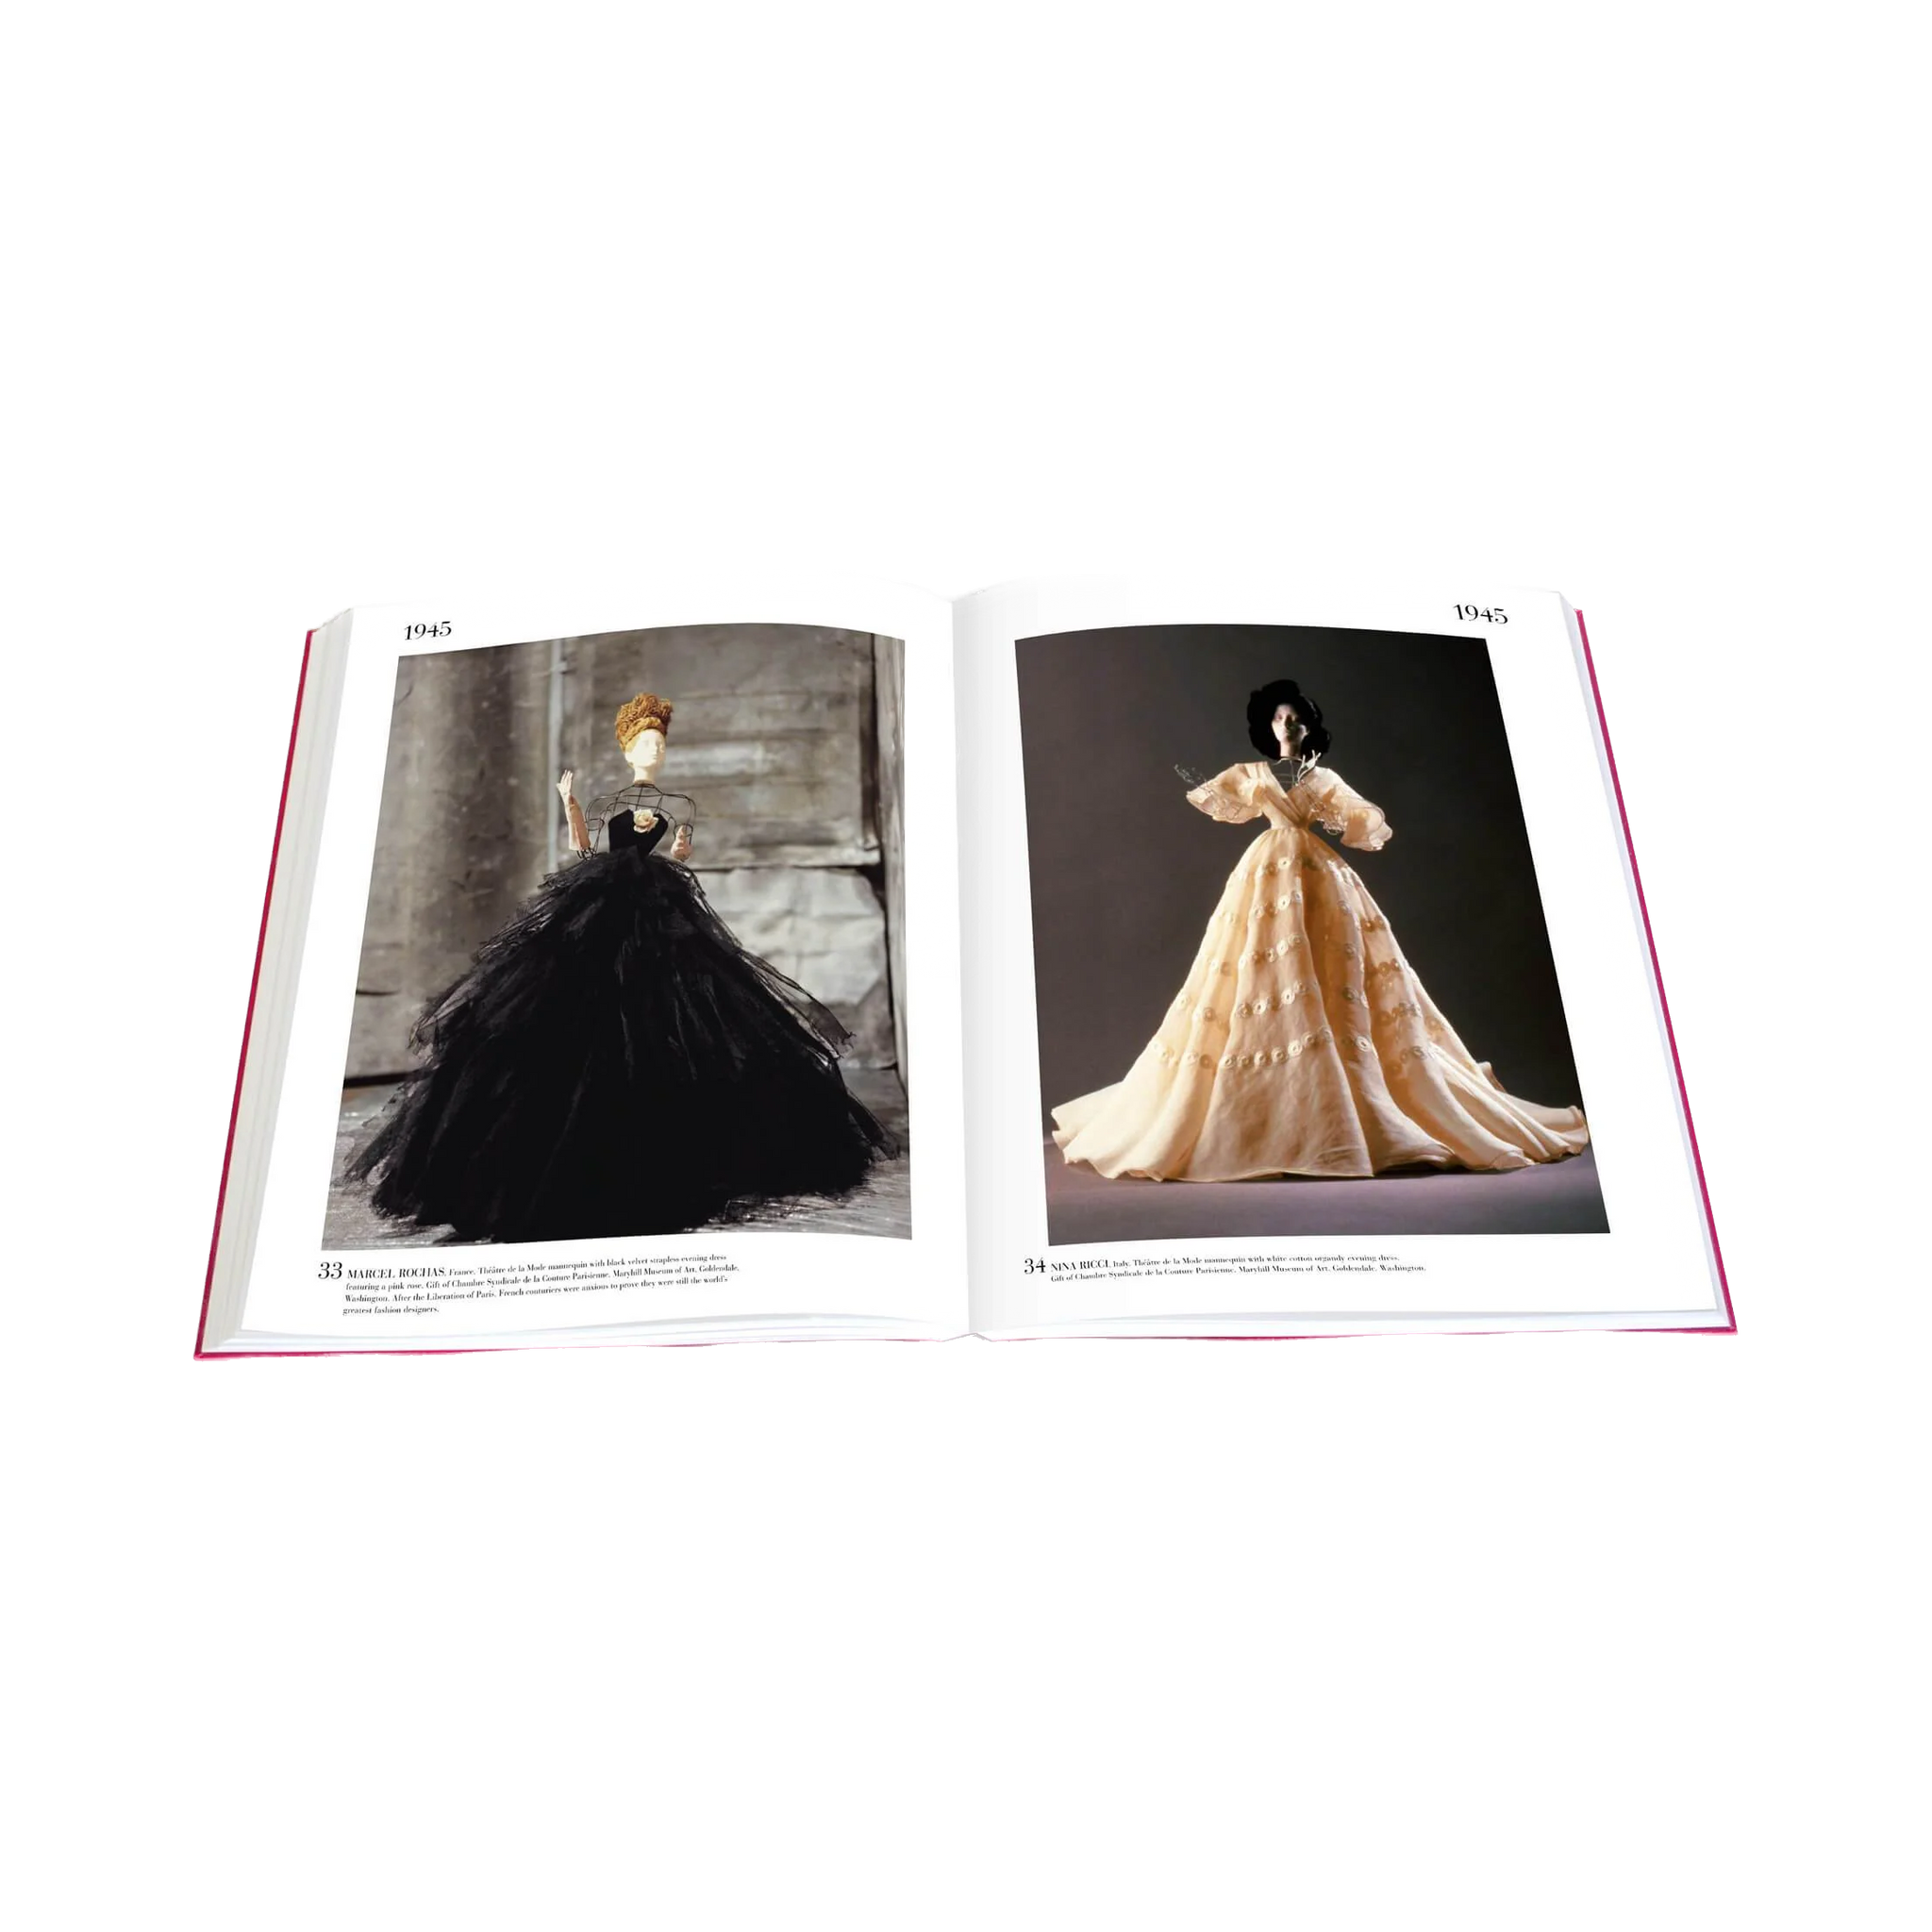 76461 Assouline The Impossible Collection of Fashion Livro